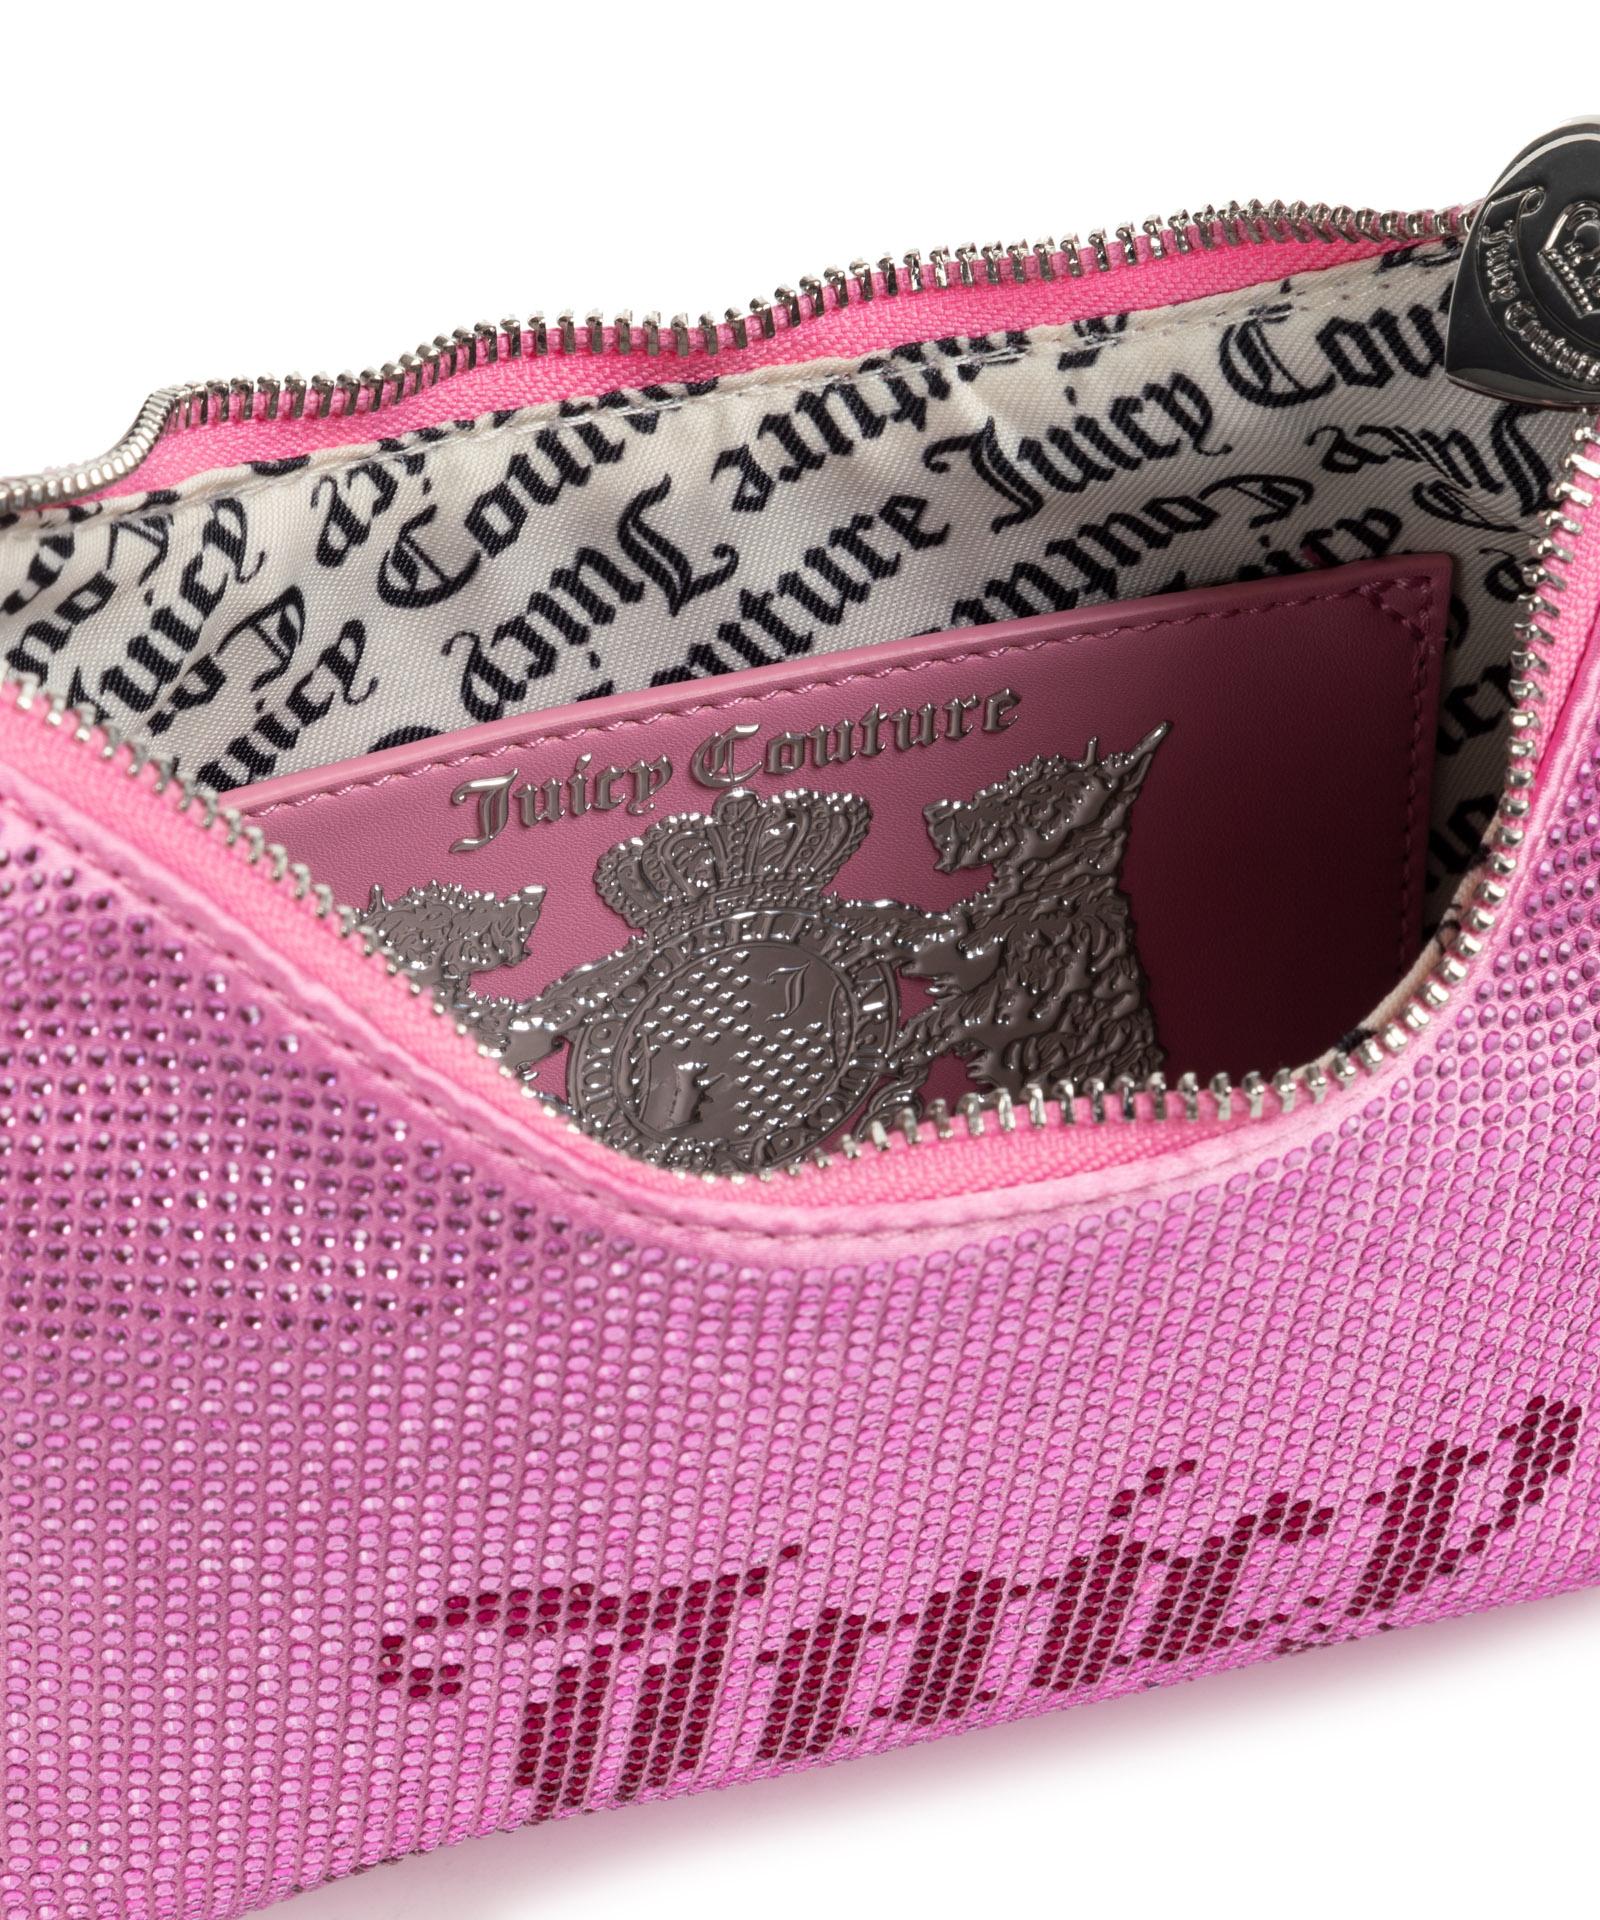 Juicy Couture purse- juicy Daydreamer bag Violet Magenta | Bags, Juicy  couture purse, Juicy couture